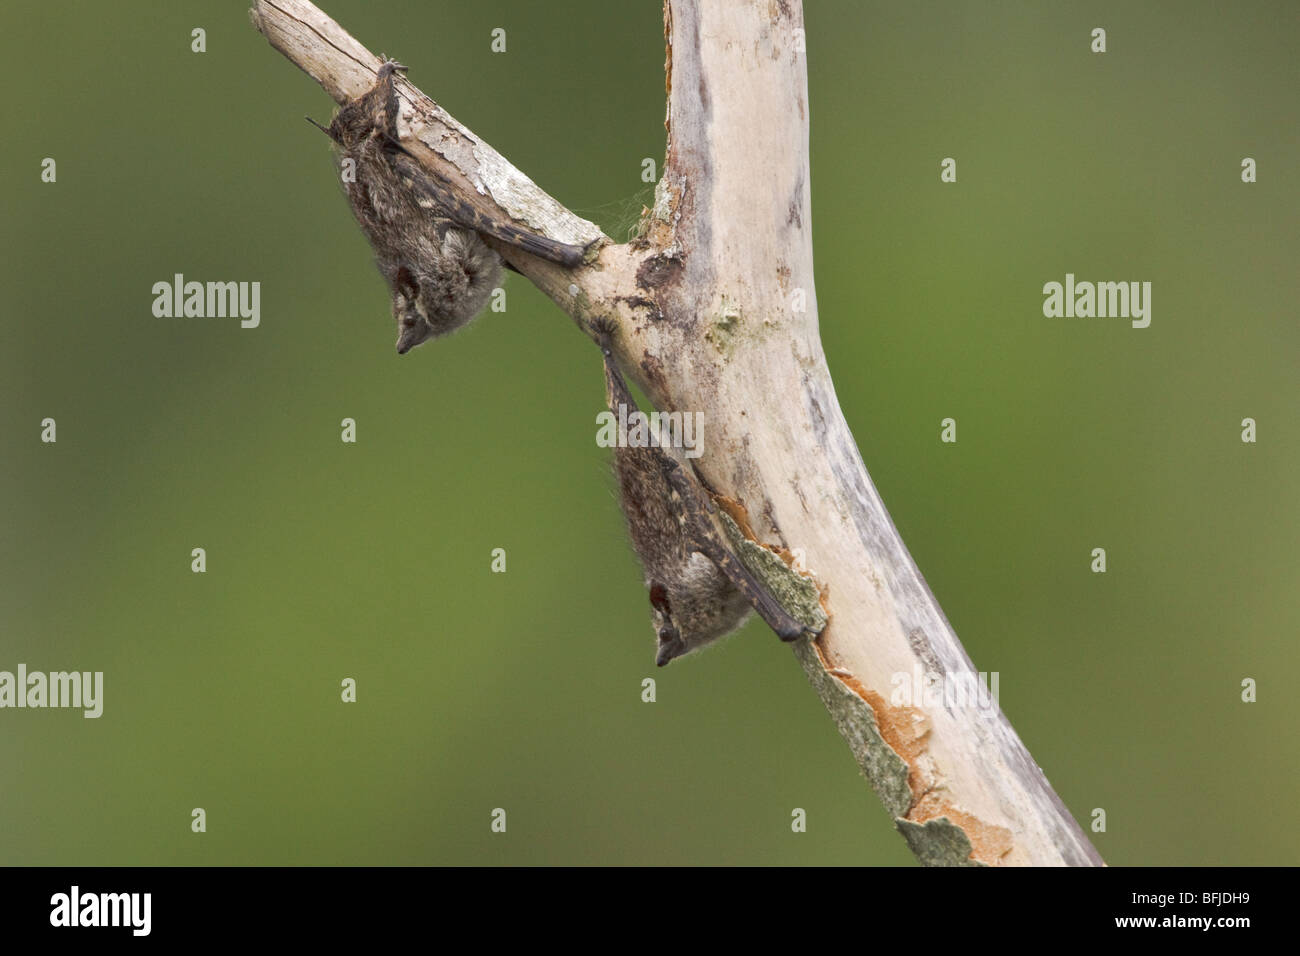 Bats perched on a branch in Amazonian Ecuador. Stock Photo